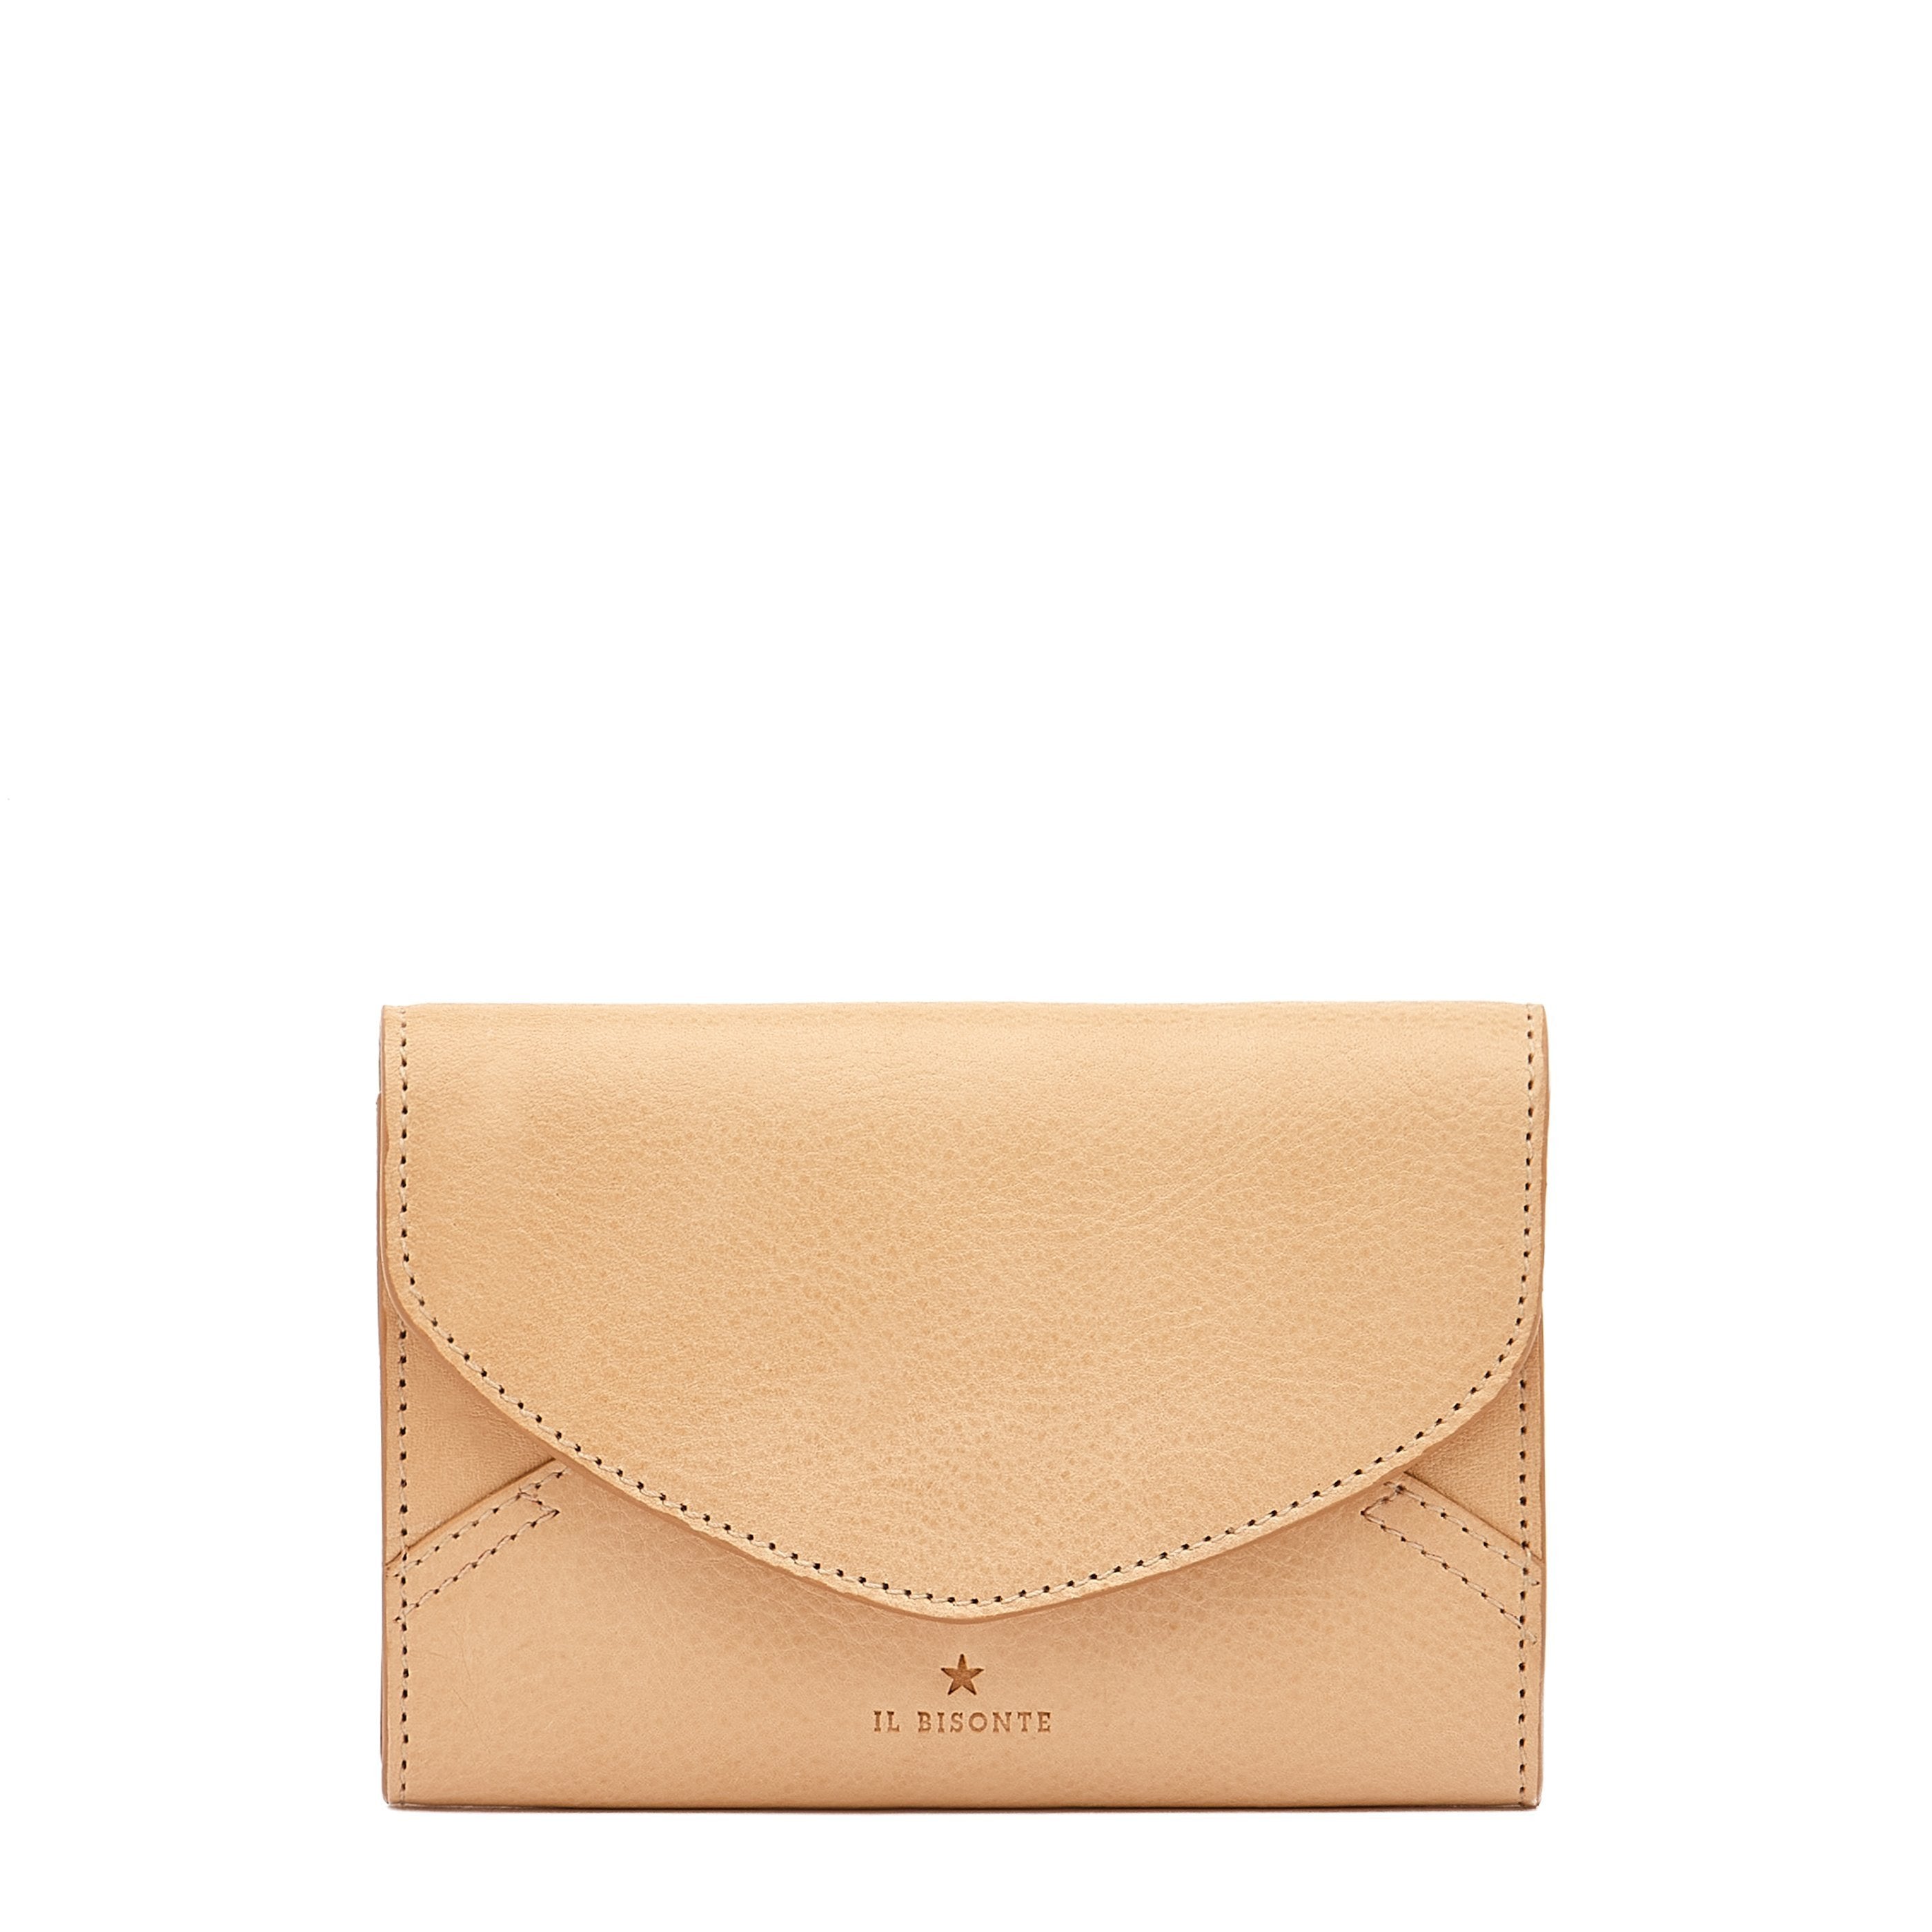 Esperia | Women's Wallet in Leather color Natural